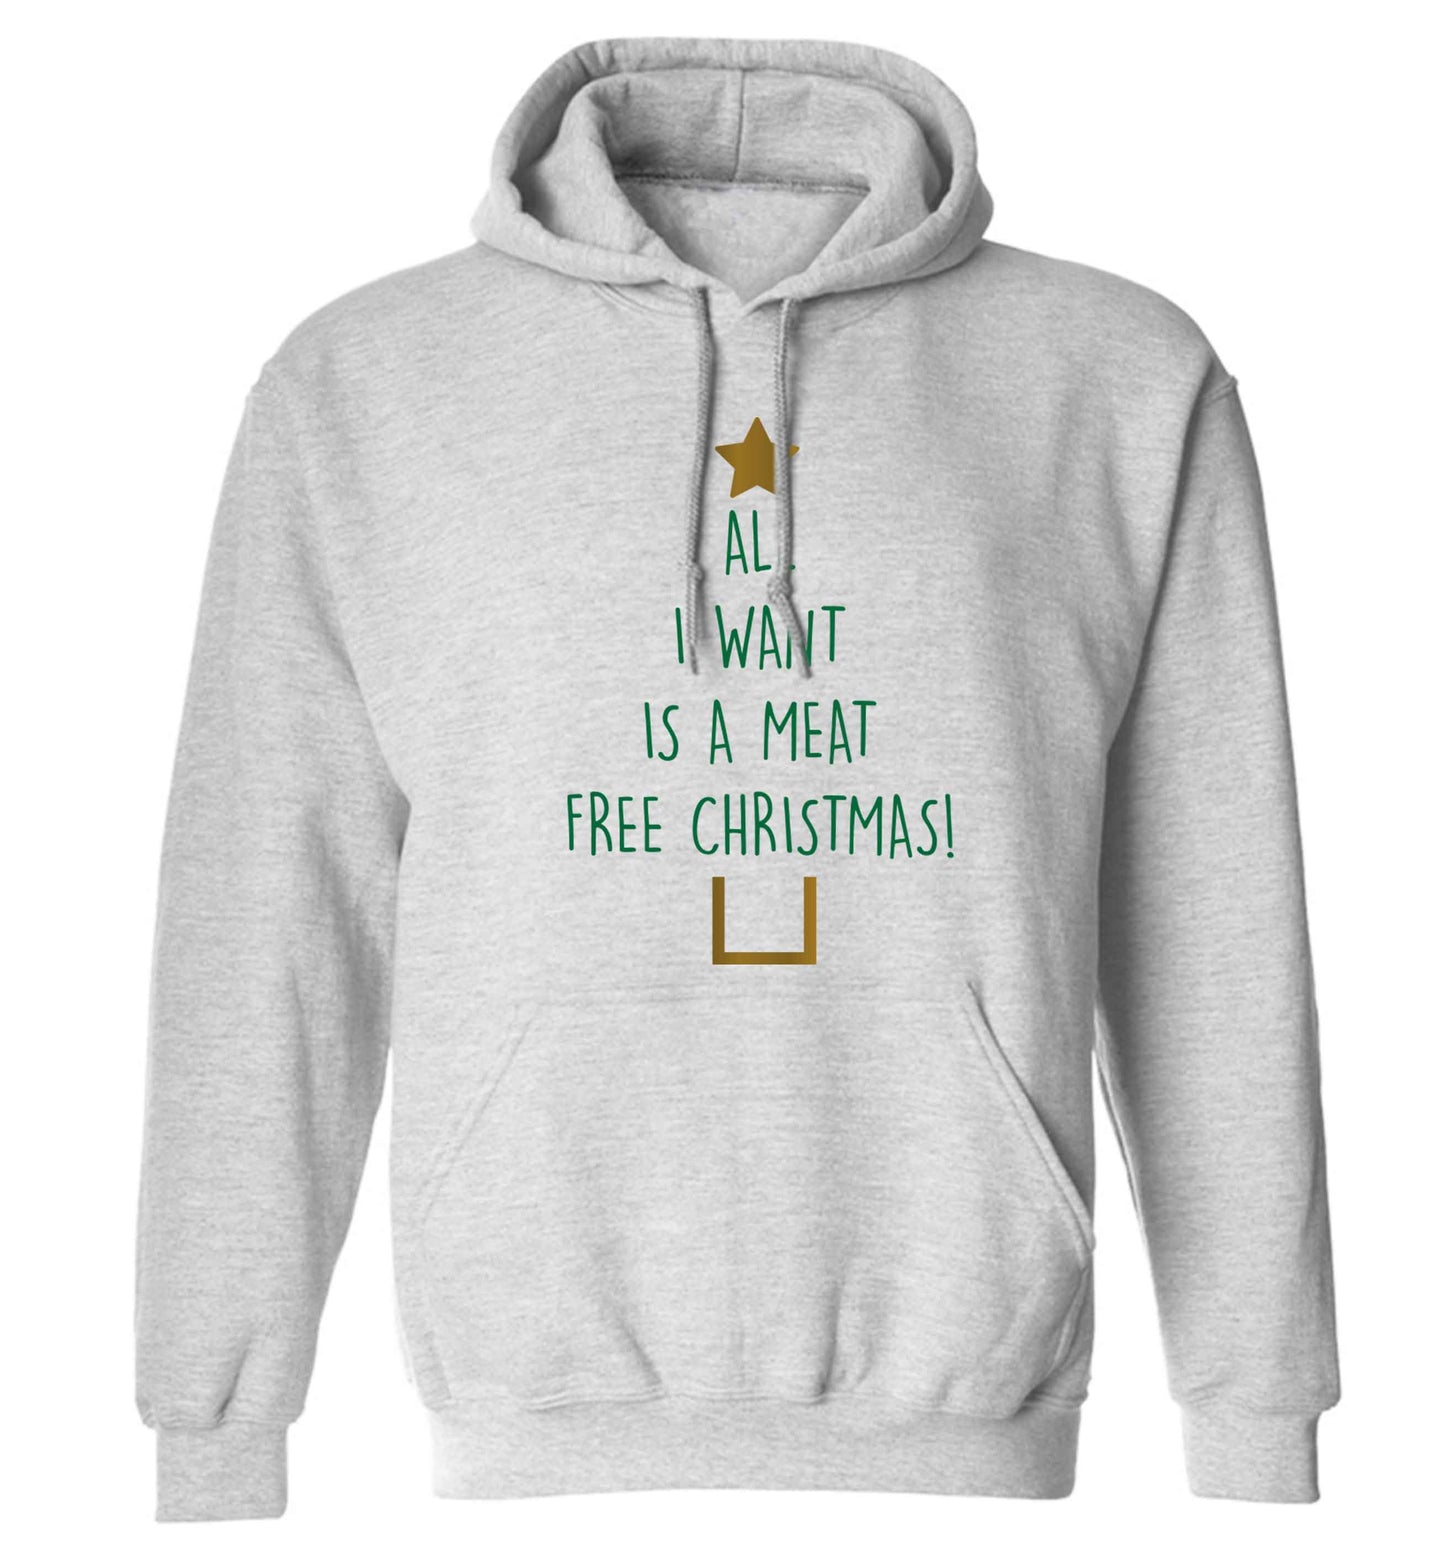 All I want is a meat free Christmas adults unisex grey hoodie 2XL